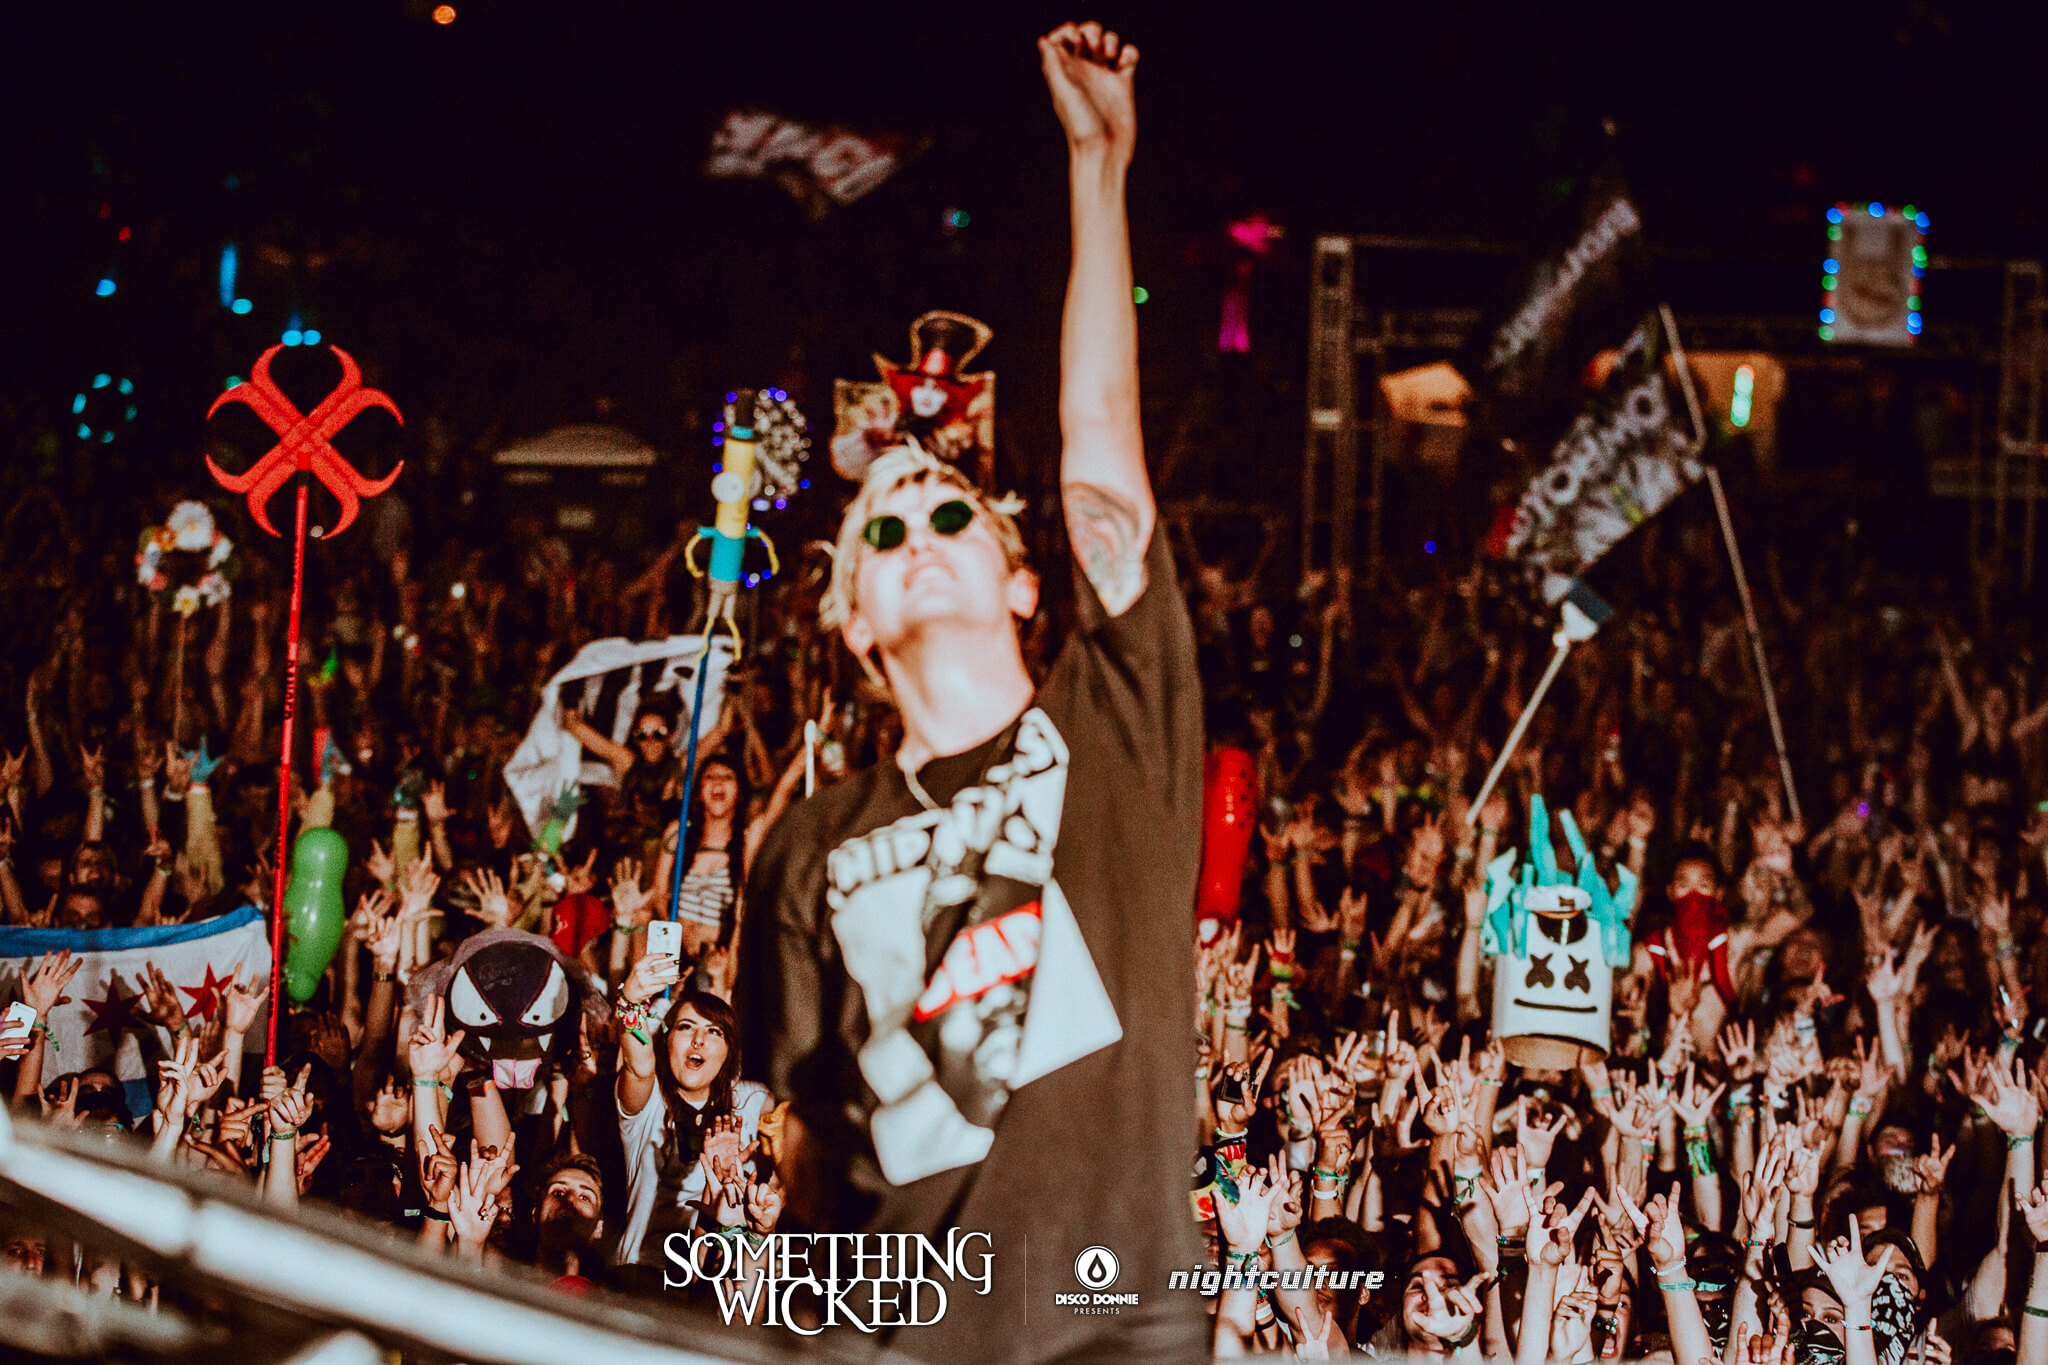 ghastly on stage with crowd of totems